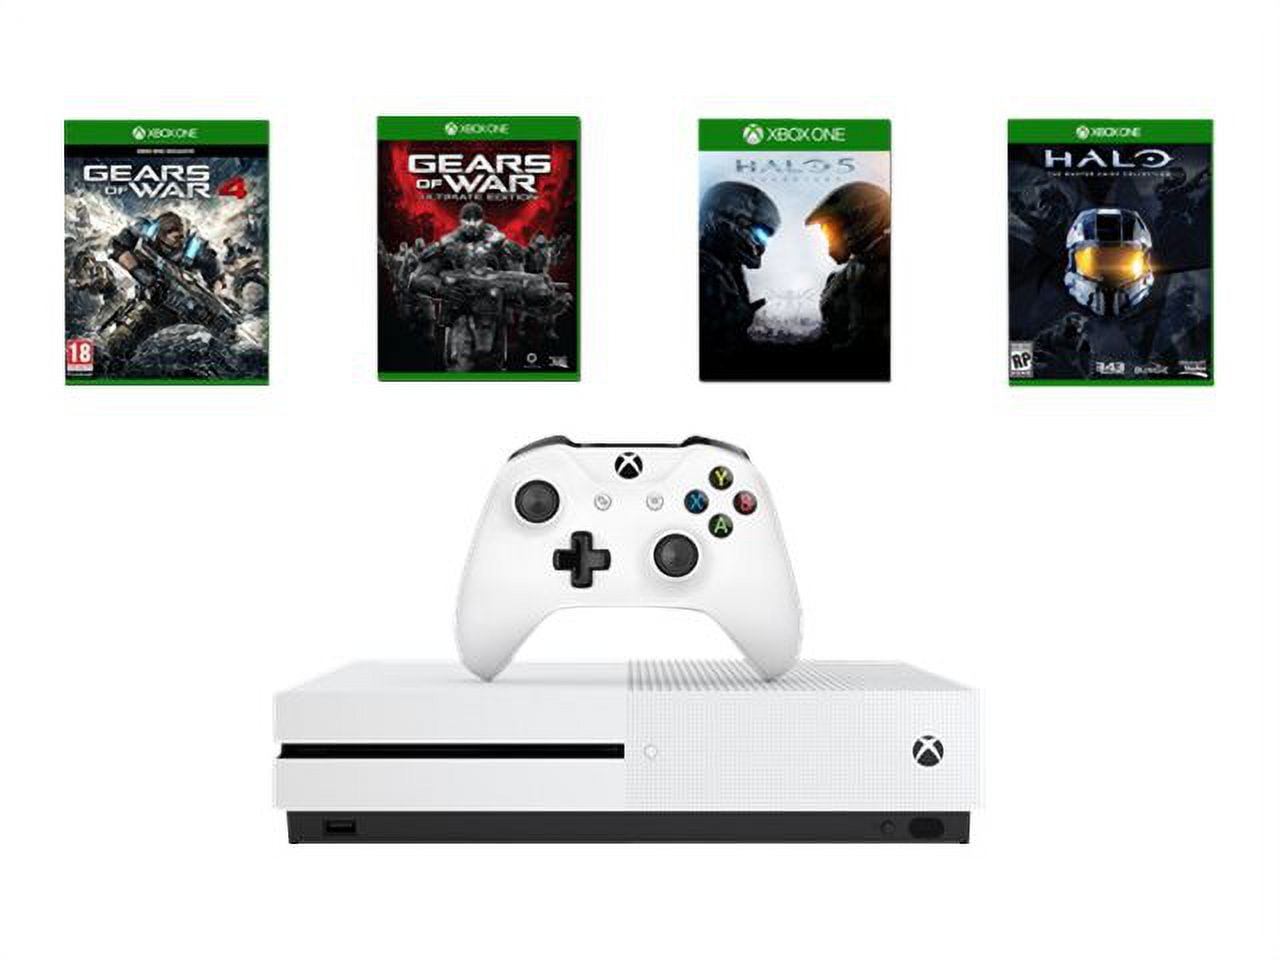  Xbox One S 500GB - Gears of War 4 Special Edition Bundle